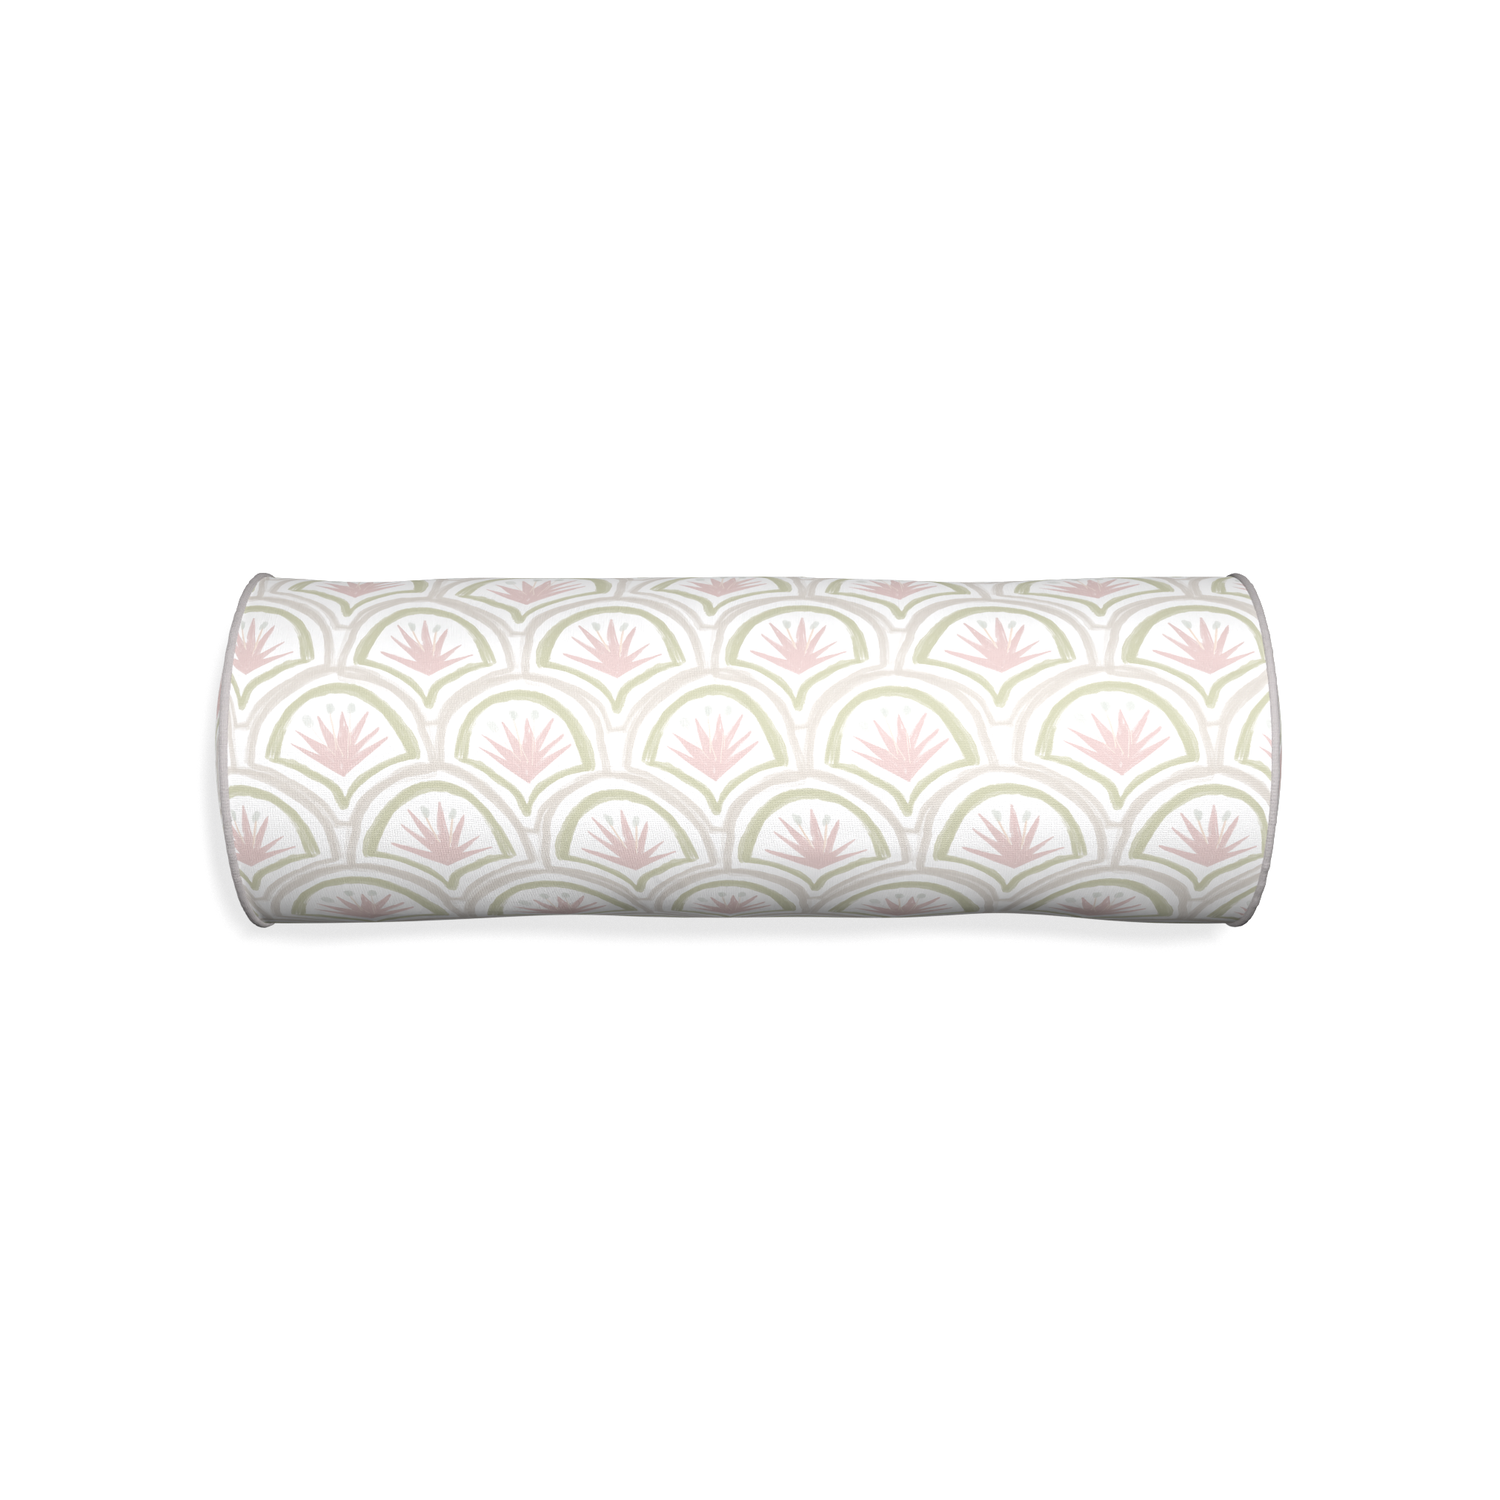 Bolster thatcher rose custom pink & green palmpillow with pebble piping on white background